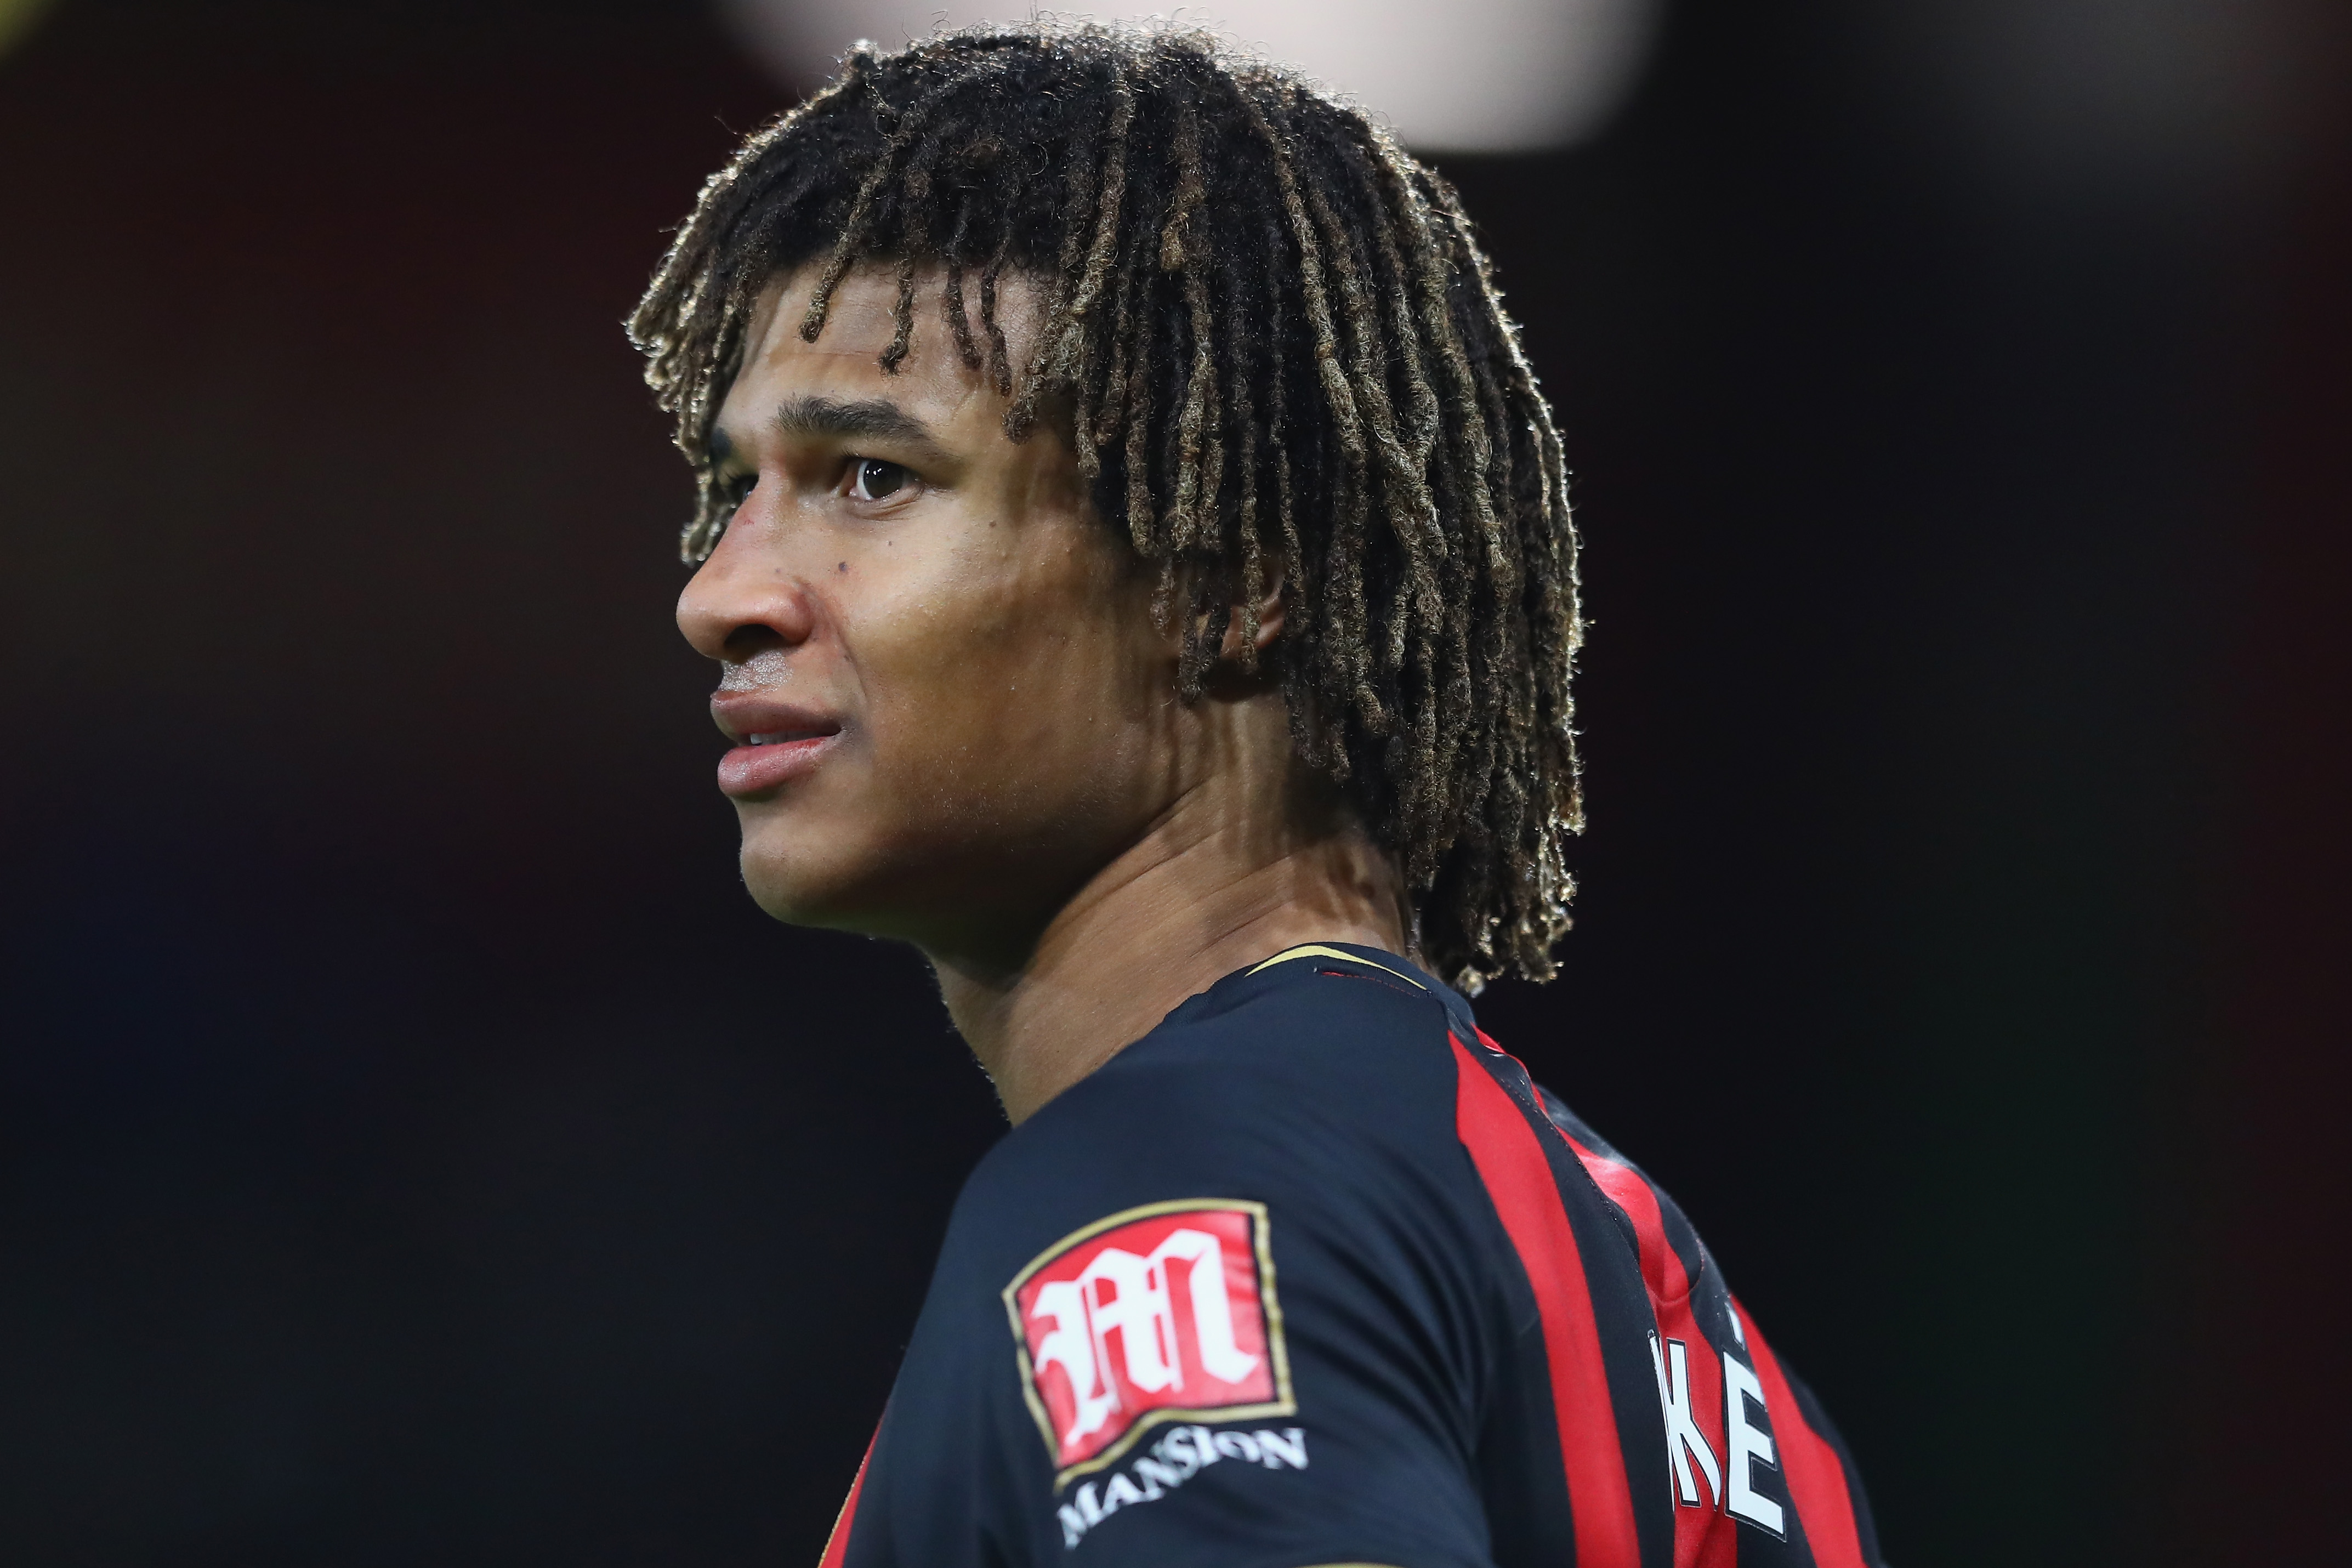 BOURNEMOUTH, ENGLAND - OCTOBER 01:  Nathan Ake of Bournemouth during the Premier League match between AFC Bournemouth and Crystal Palace at Vitality Stadium on October 1, 2018 in Bournemouth, United Kingdom.  (Photo by Michael Steele/Getty Images)